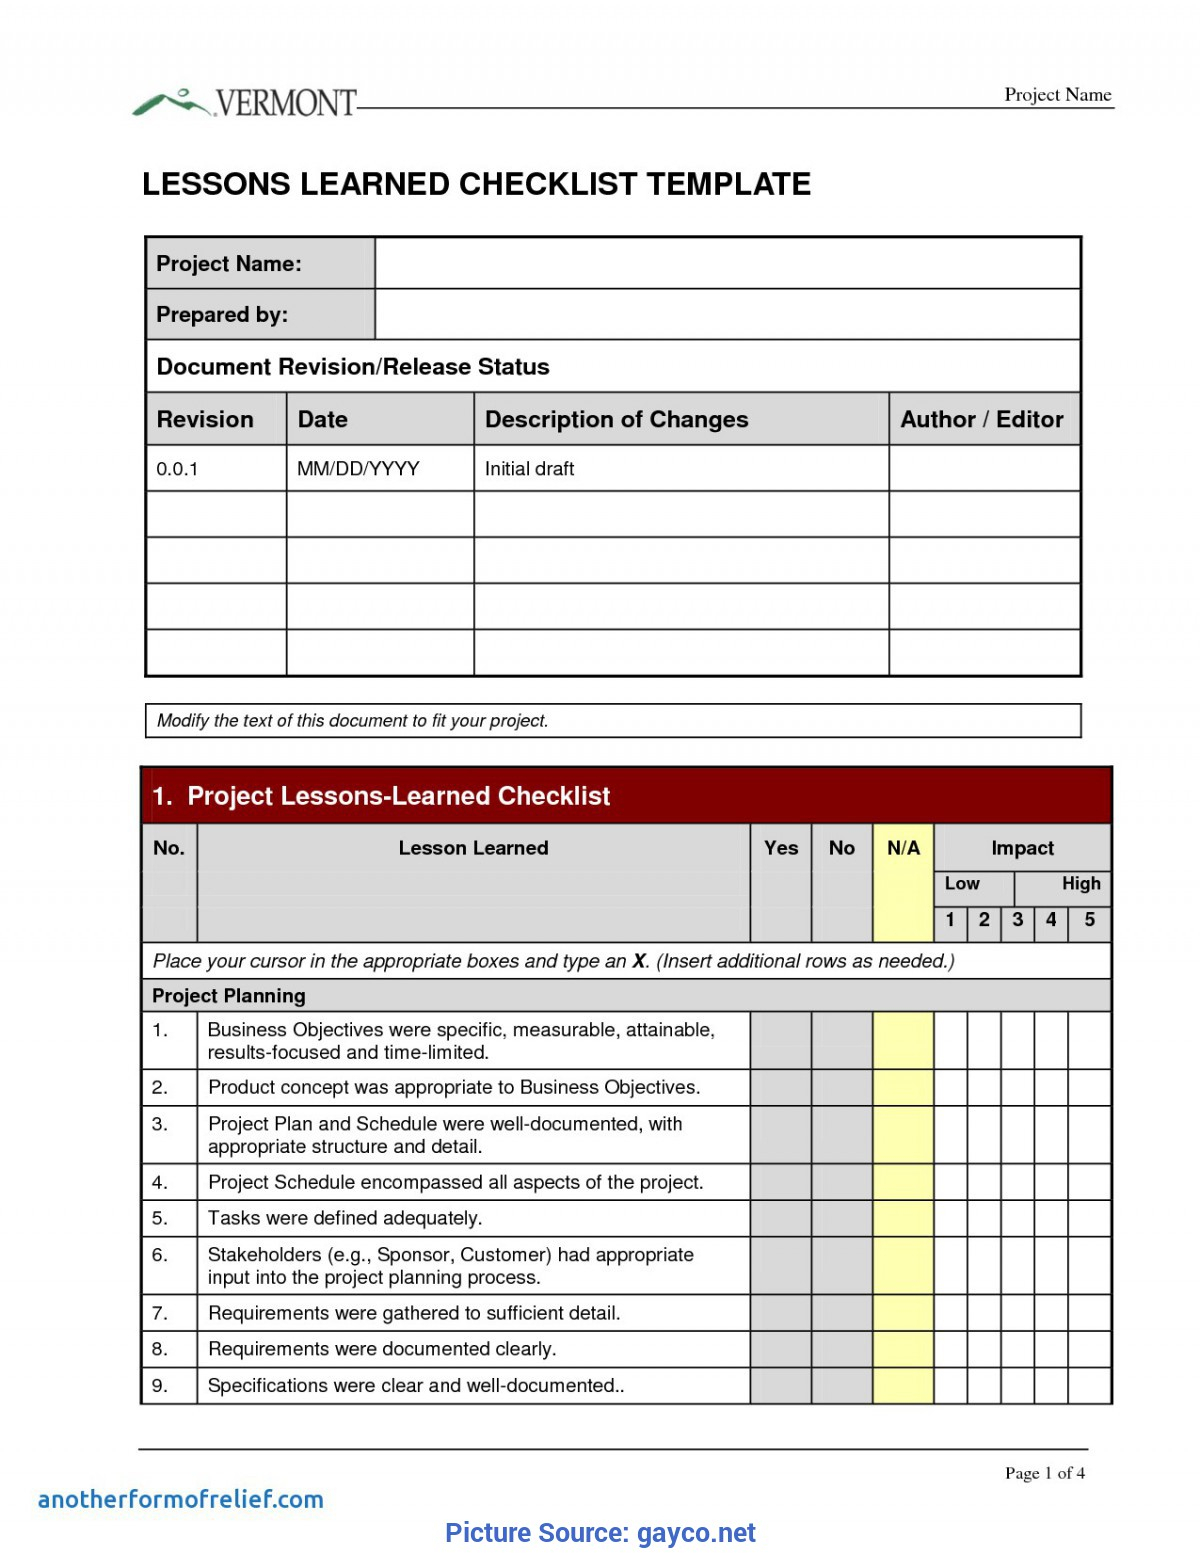 Great Lessons Learnt Template Checklist Prince2 Lessons In Prince2 Lessons Learned Report Template